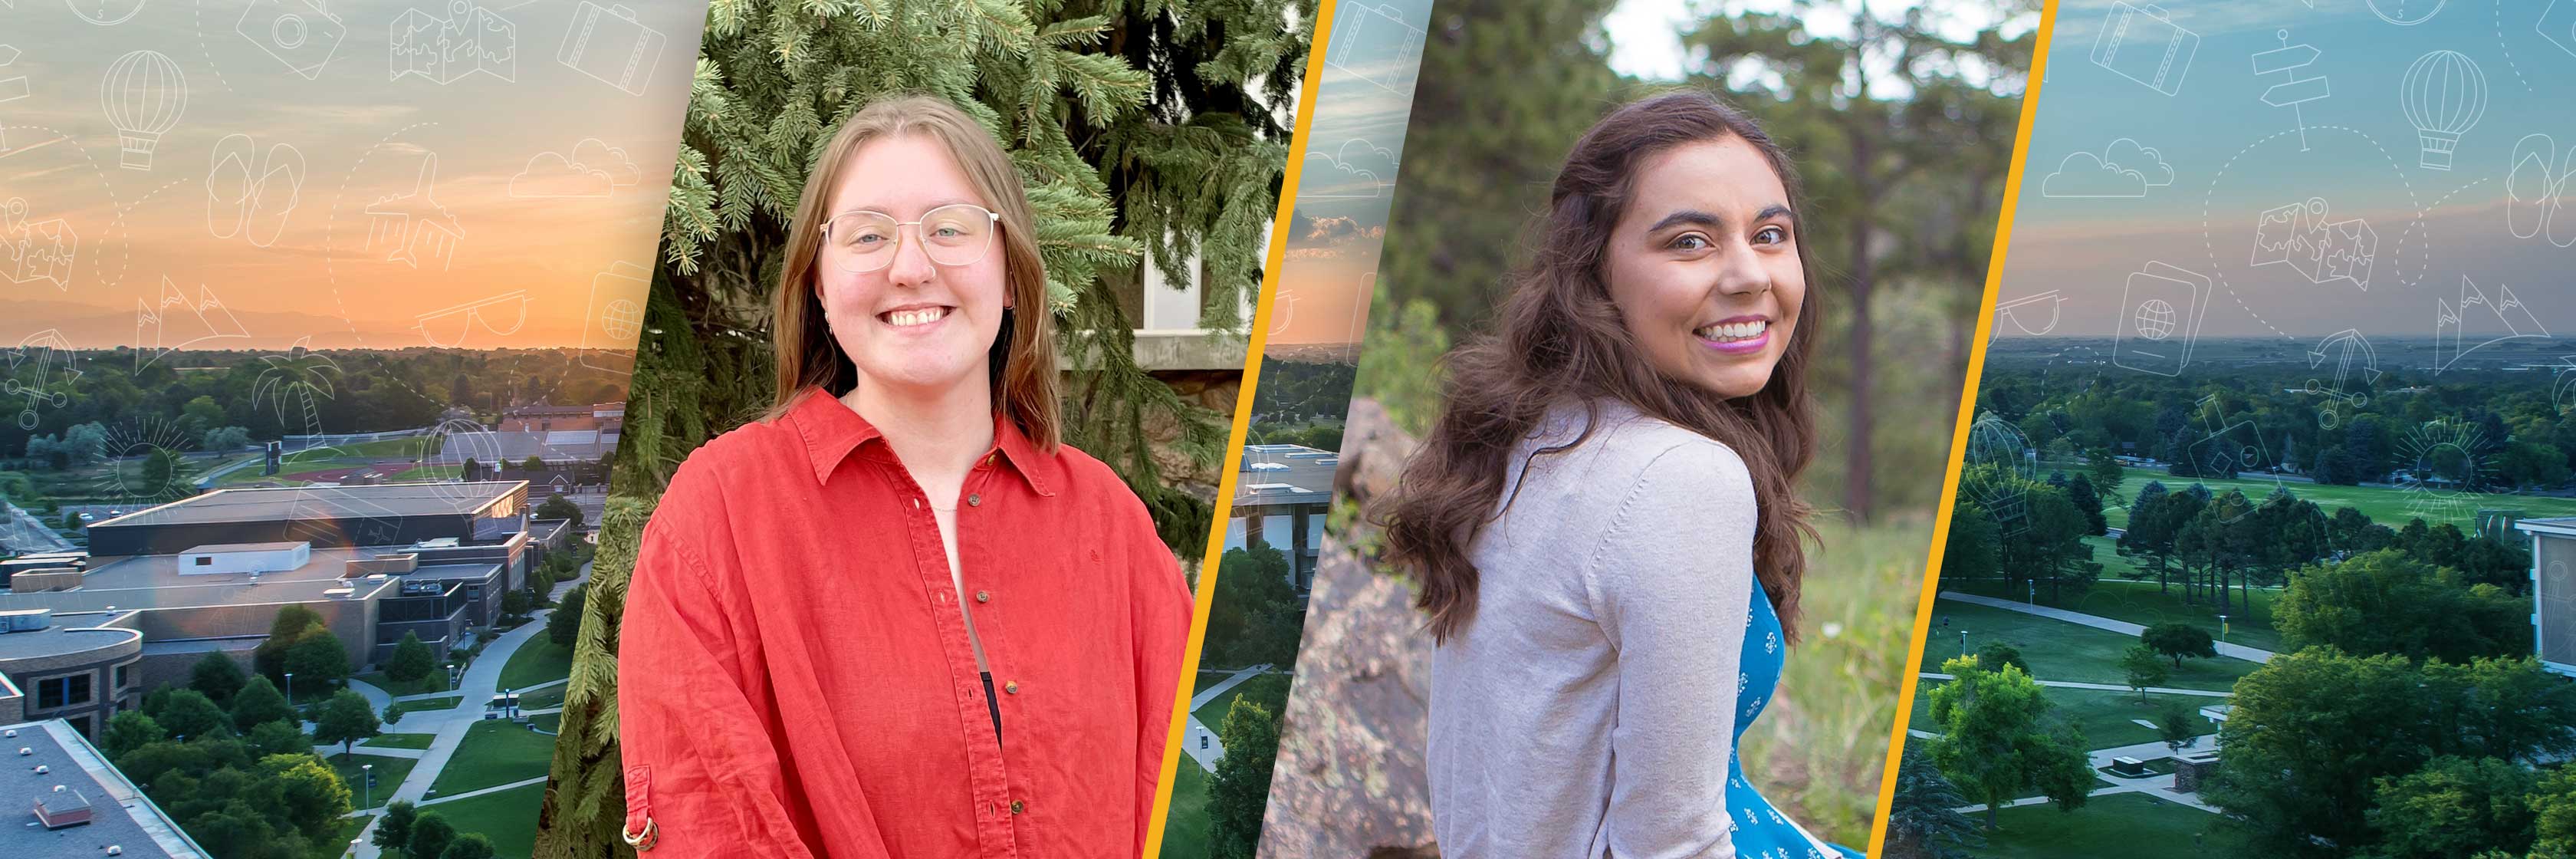 Semifinalists for the fulbright award, Pennie Nichol (left) and Jenna Mischke (right).